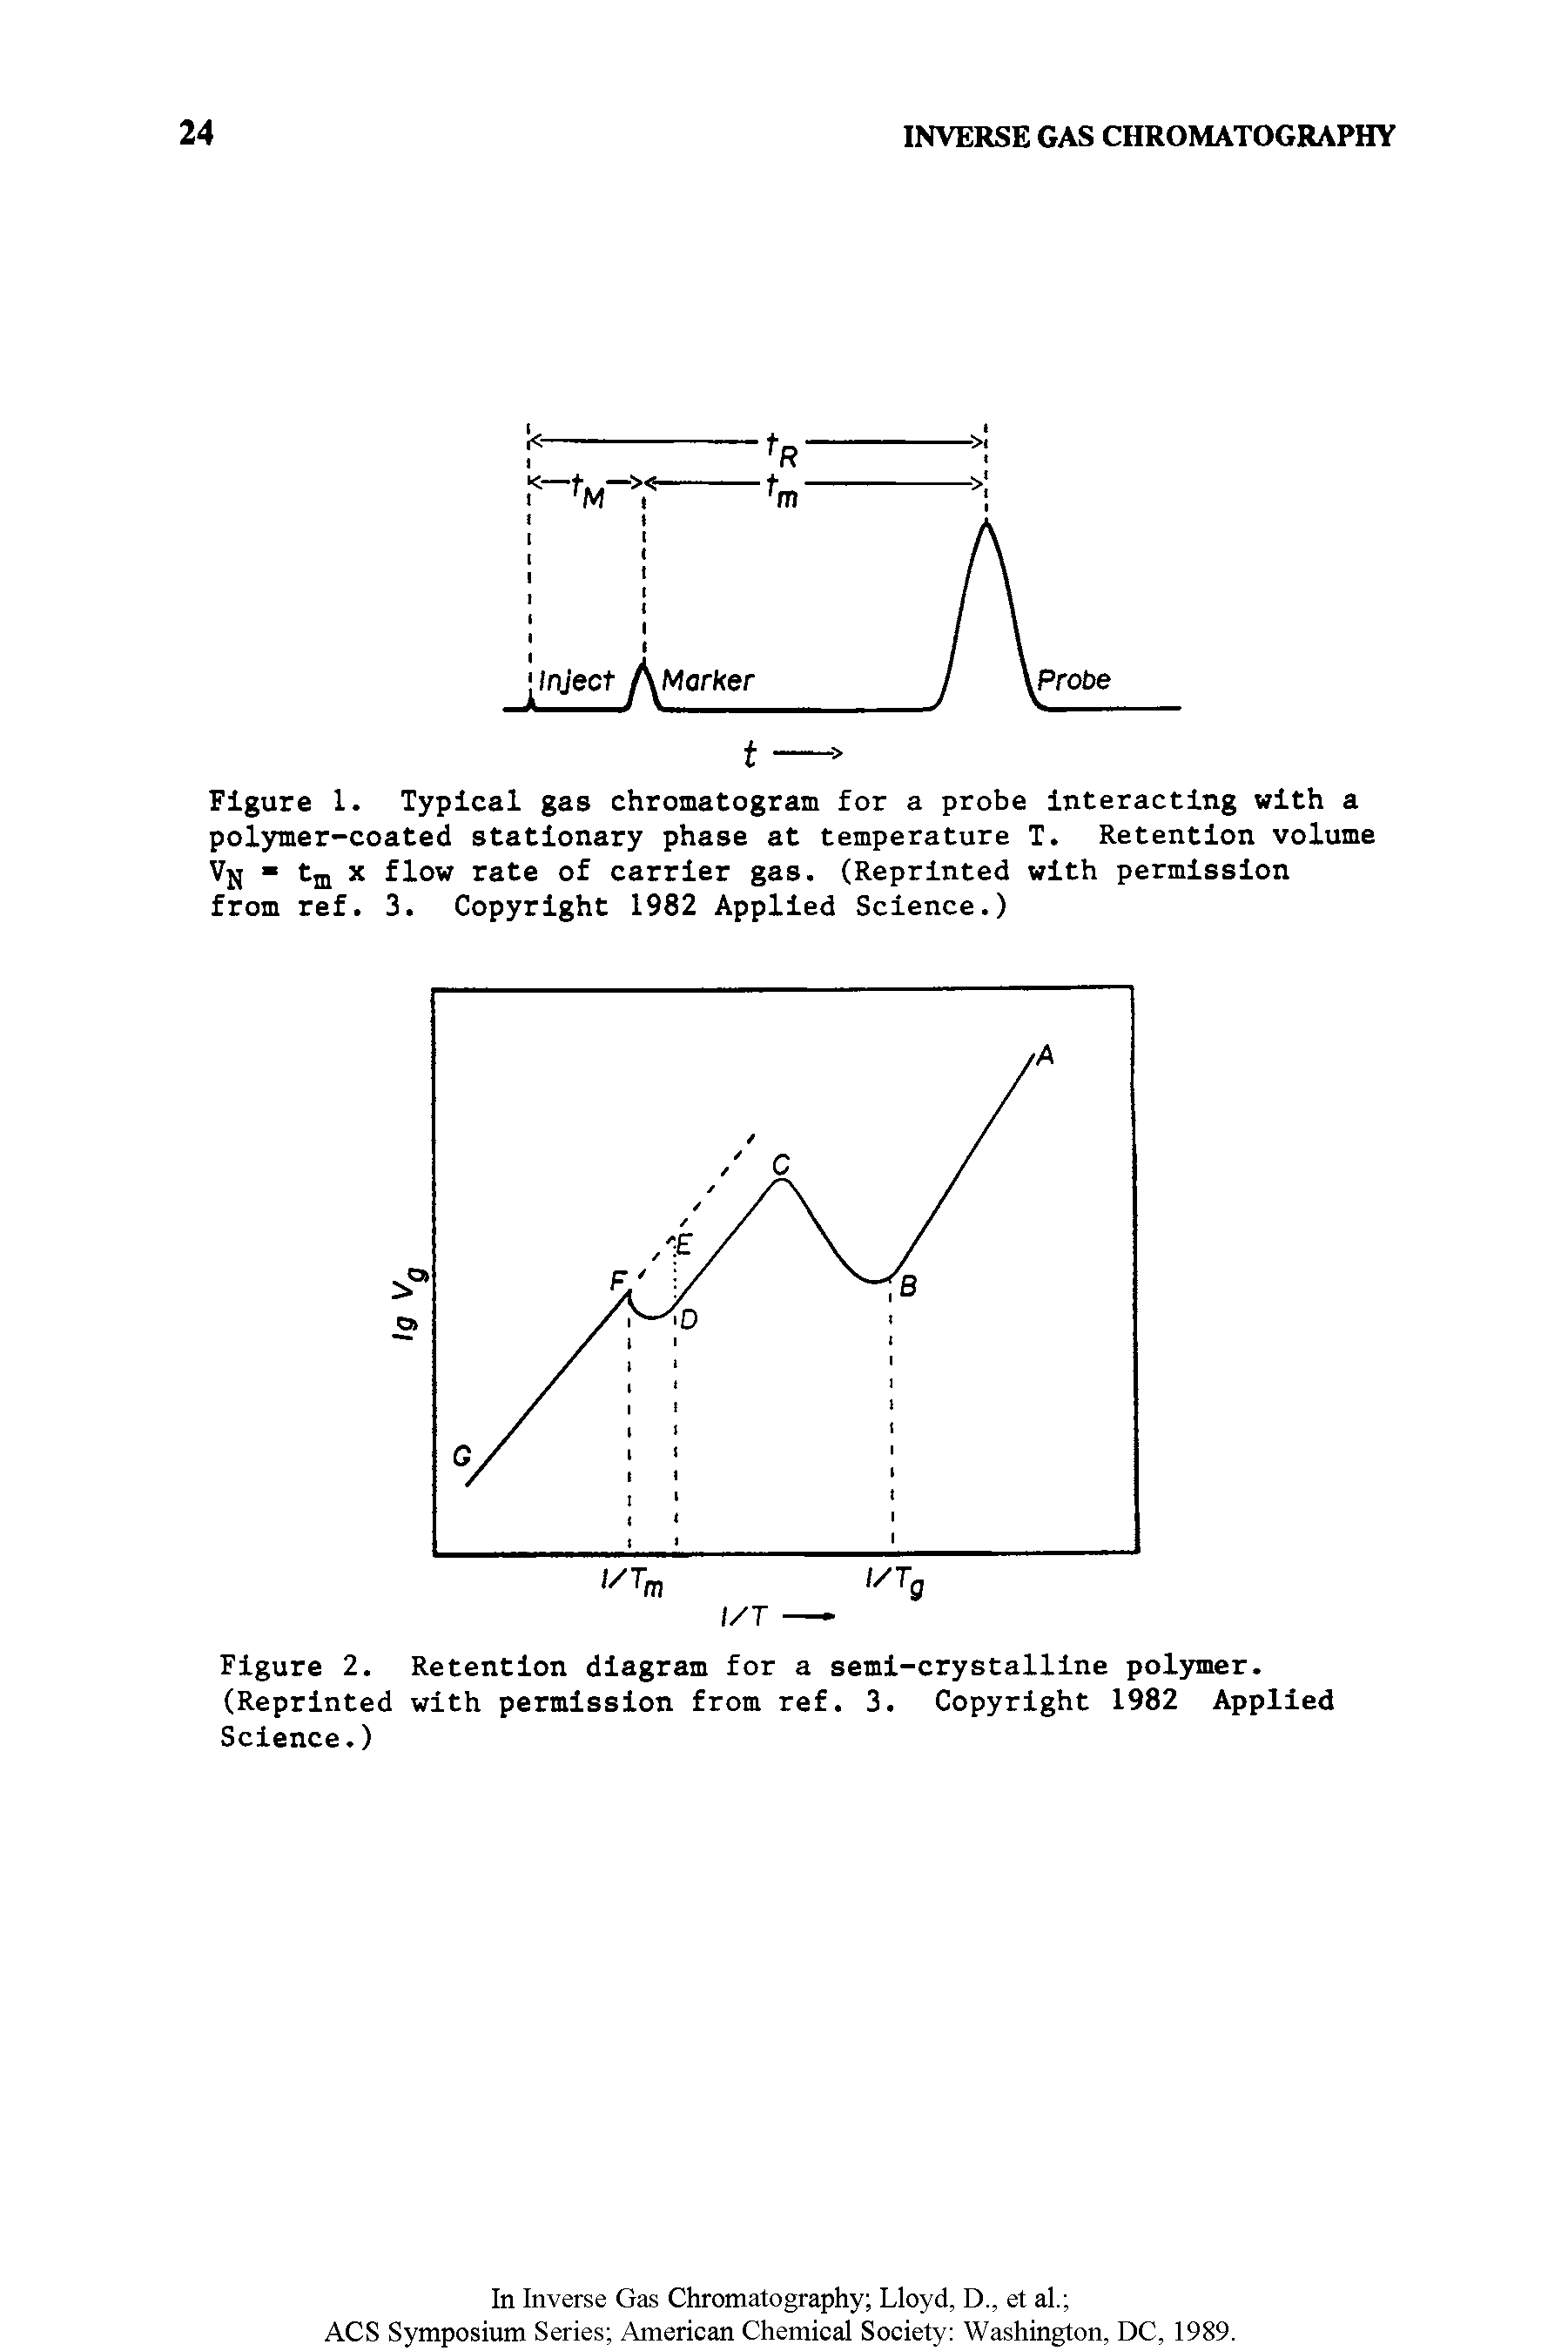 Figure 2. Retention diagram for a semi-crystalline polymer. (Reprinted with permission from ref. 3. Copyright 1982 Applied Science.)...